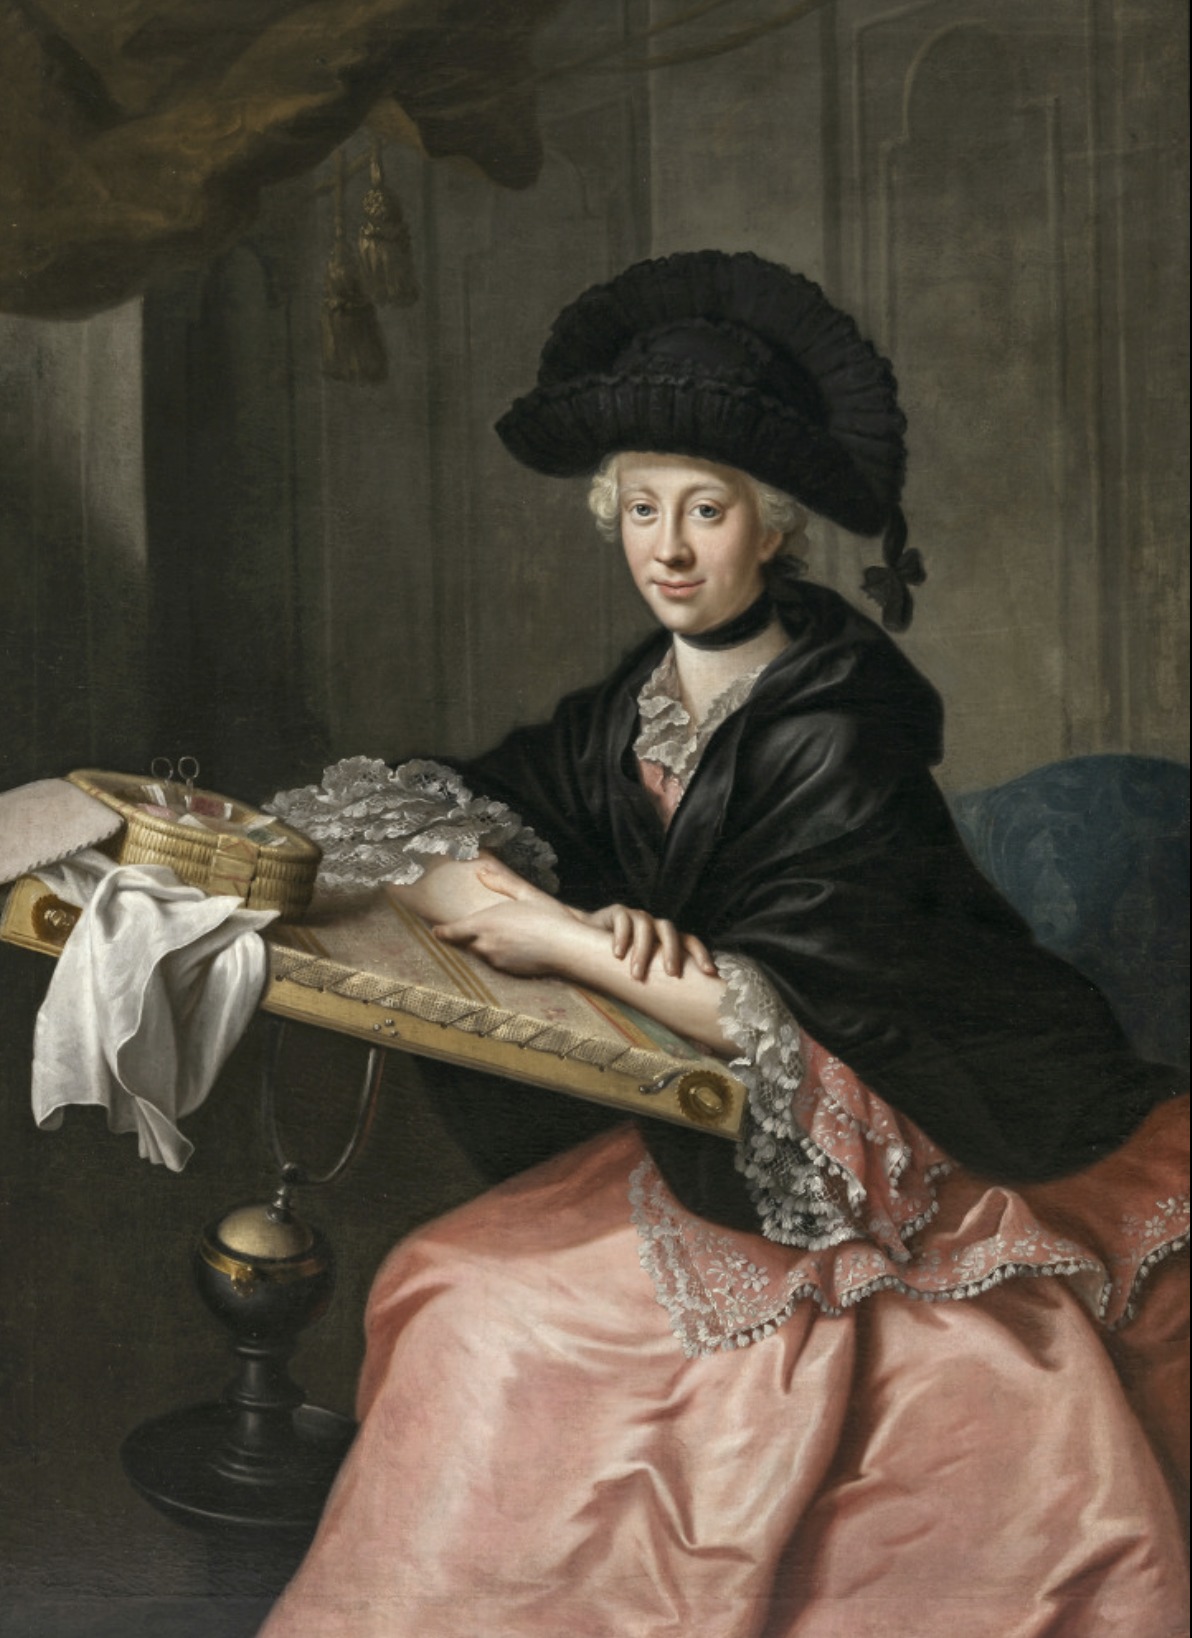 An 18th century portrait showing a lady with powdered hair, seated at a slanted table with her sewing basket in front of her, wearing a black silk mantle over a pink dress, with striking black hat